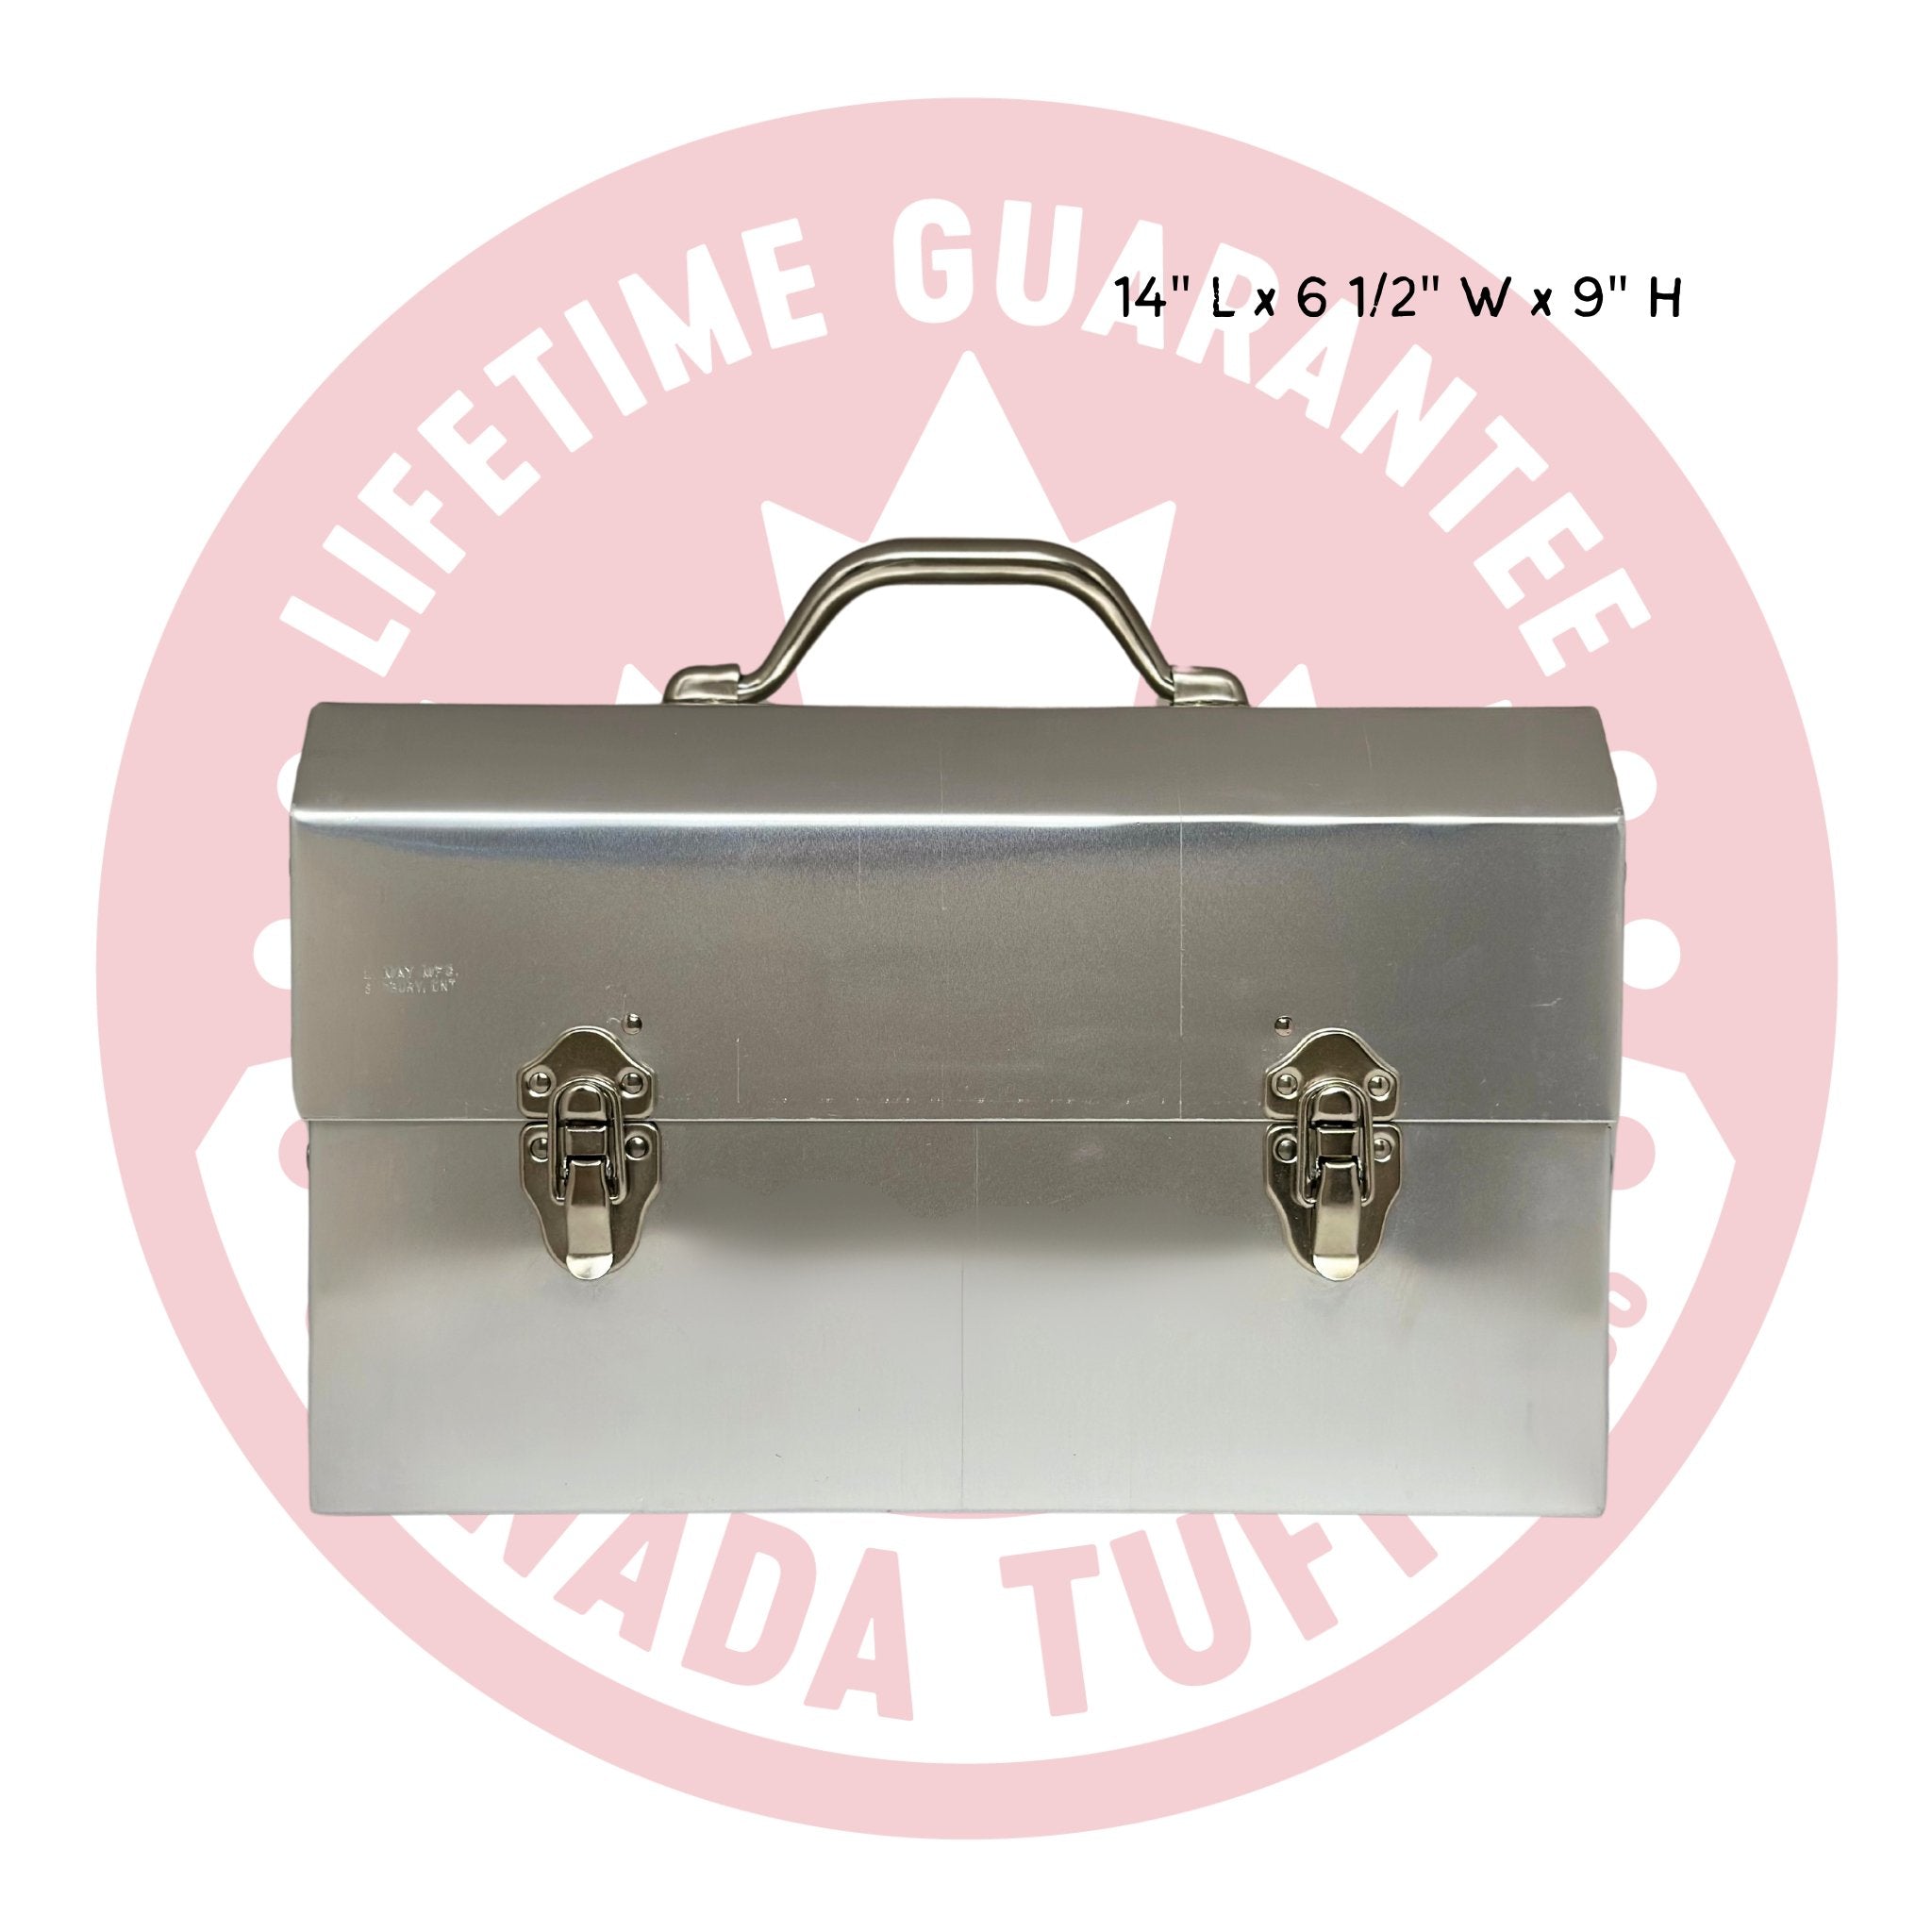 Plain Metal Lunch Box, Size: One Size